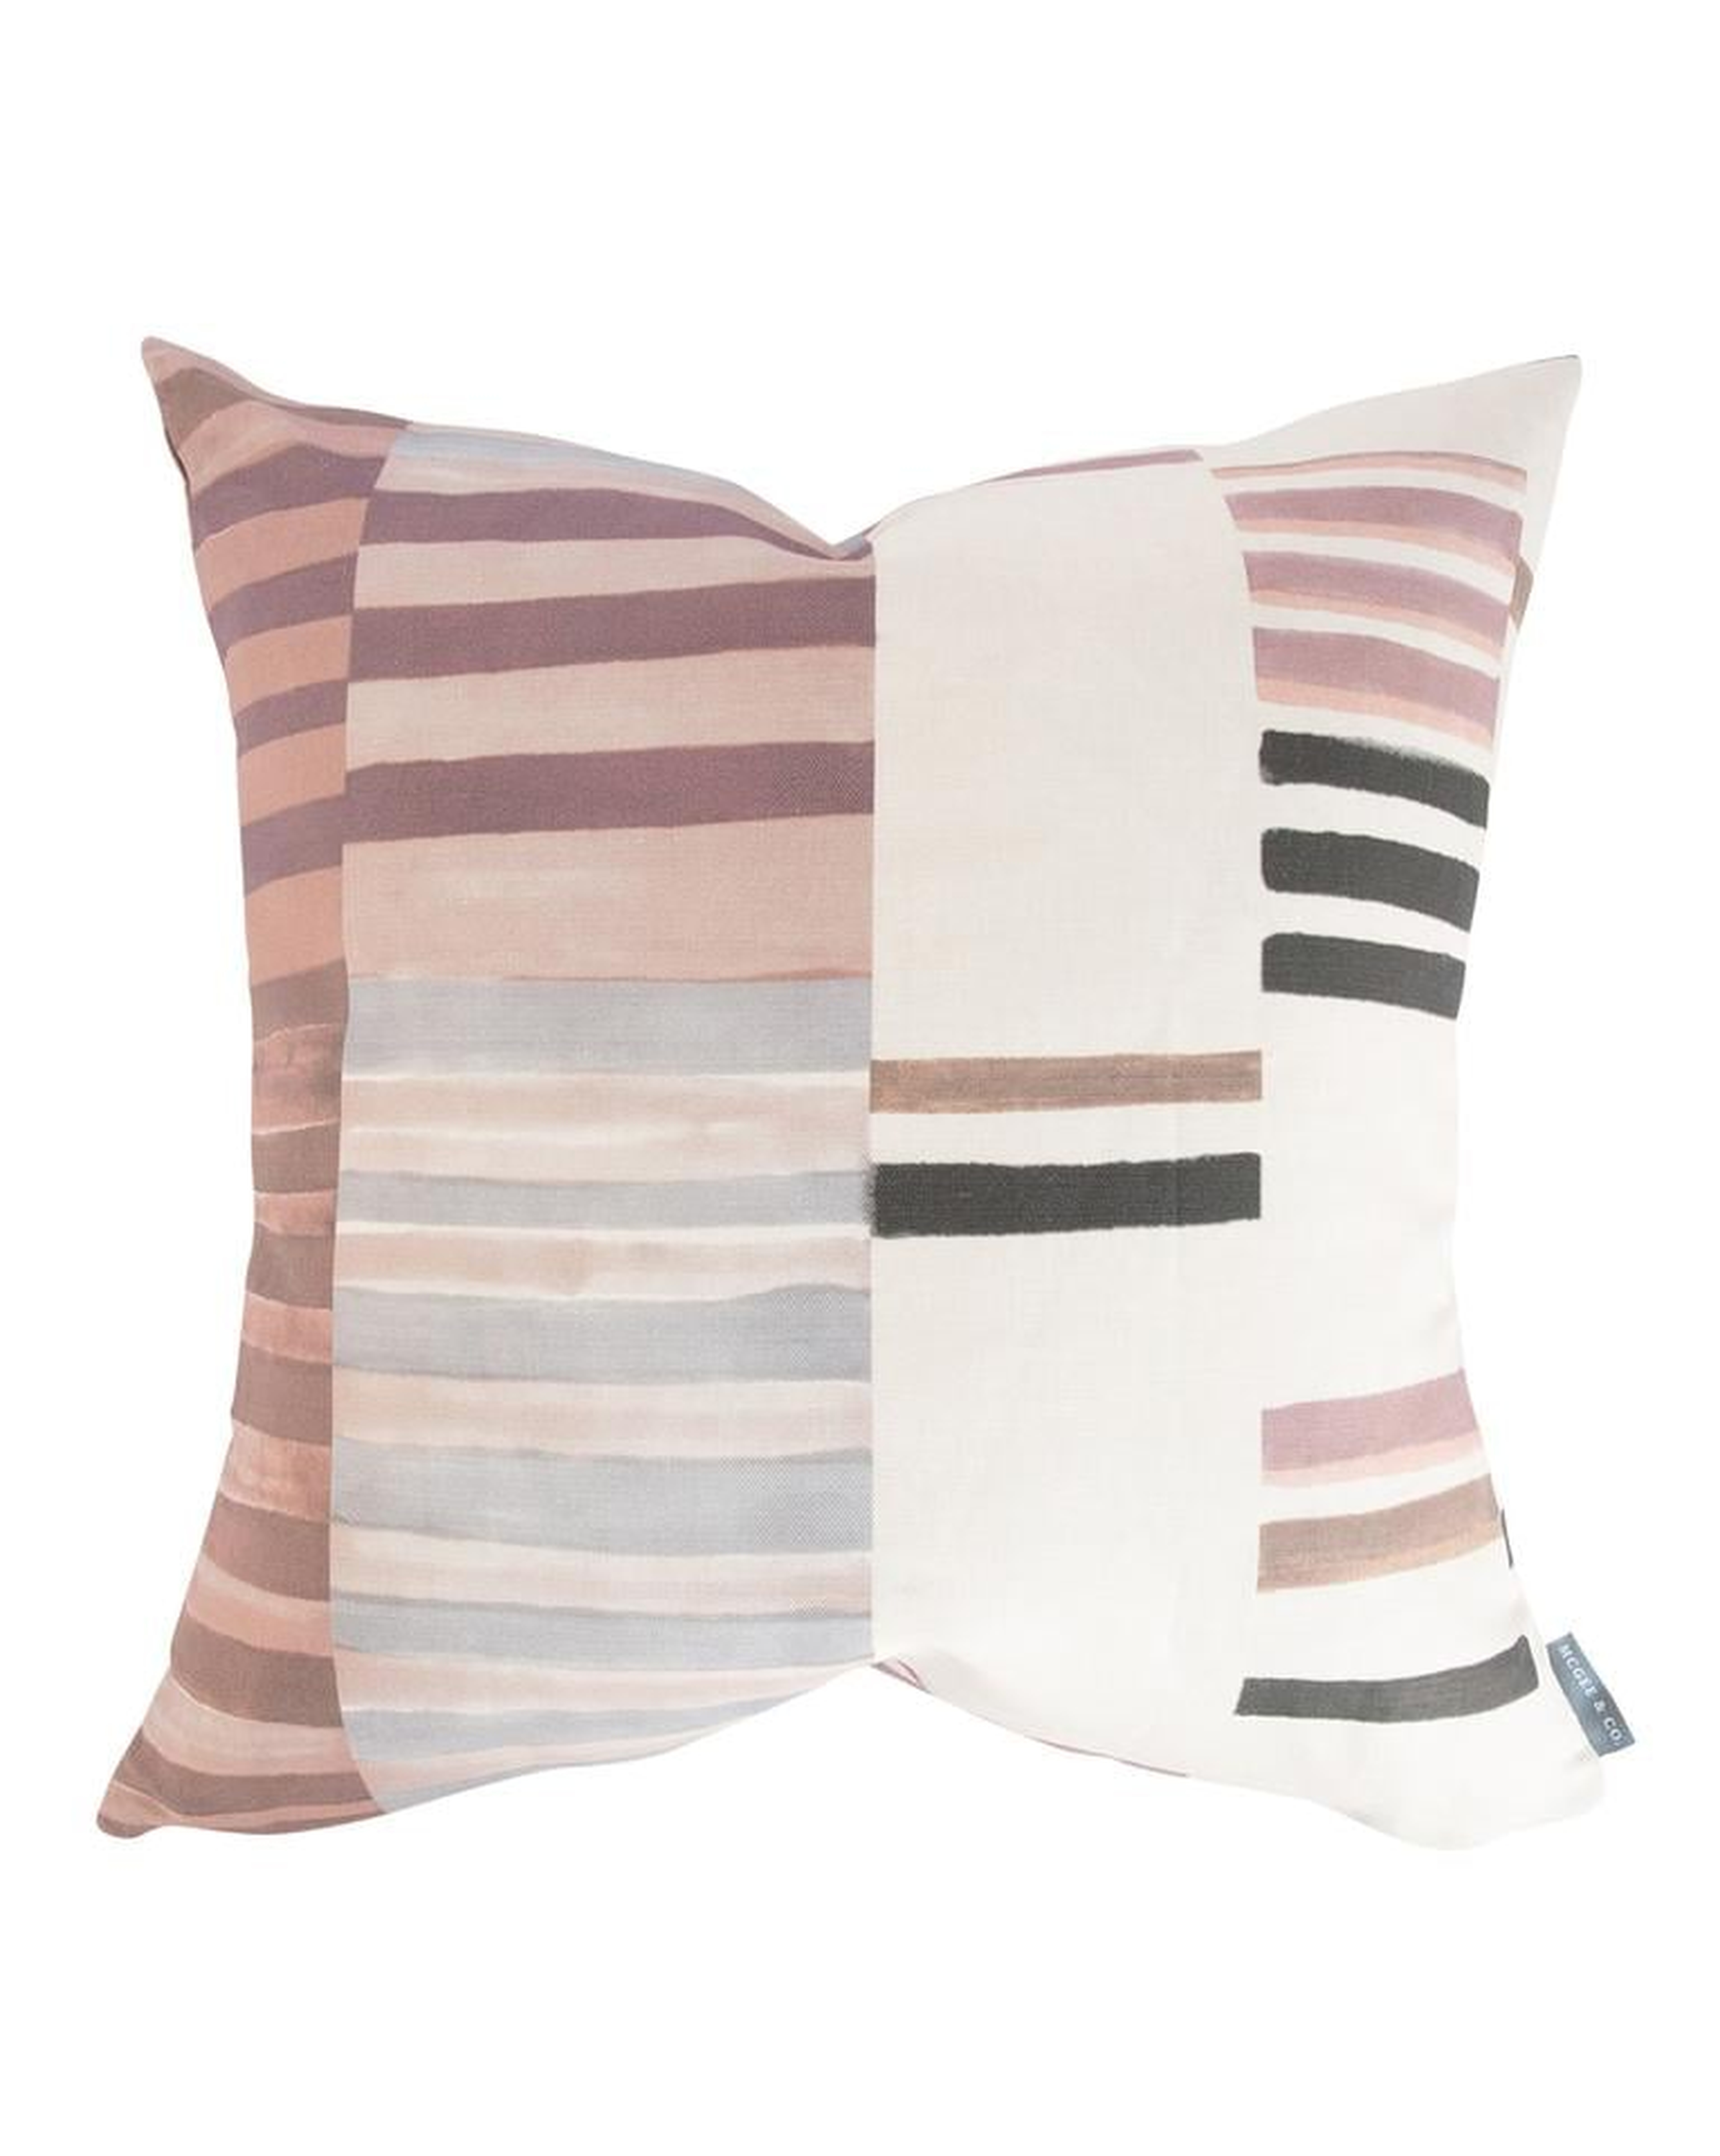 ZOEY PATCHWORK STRIPE PILLOW COVER WITHOUT INSERT, 12" x 24" - McGee & Co.